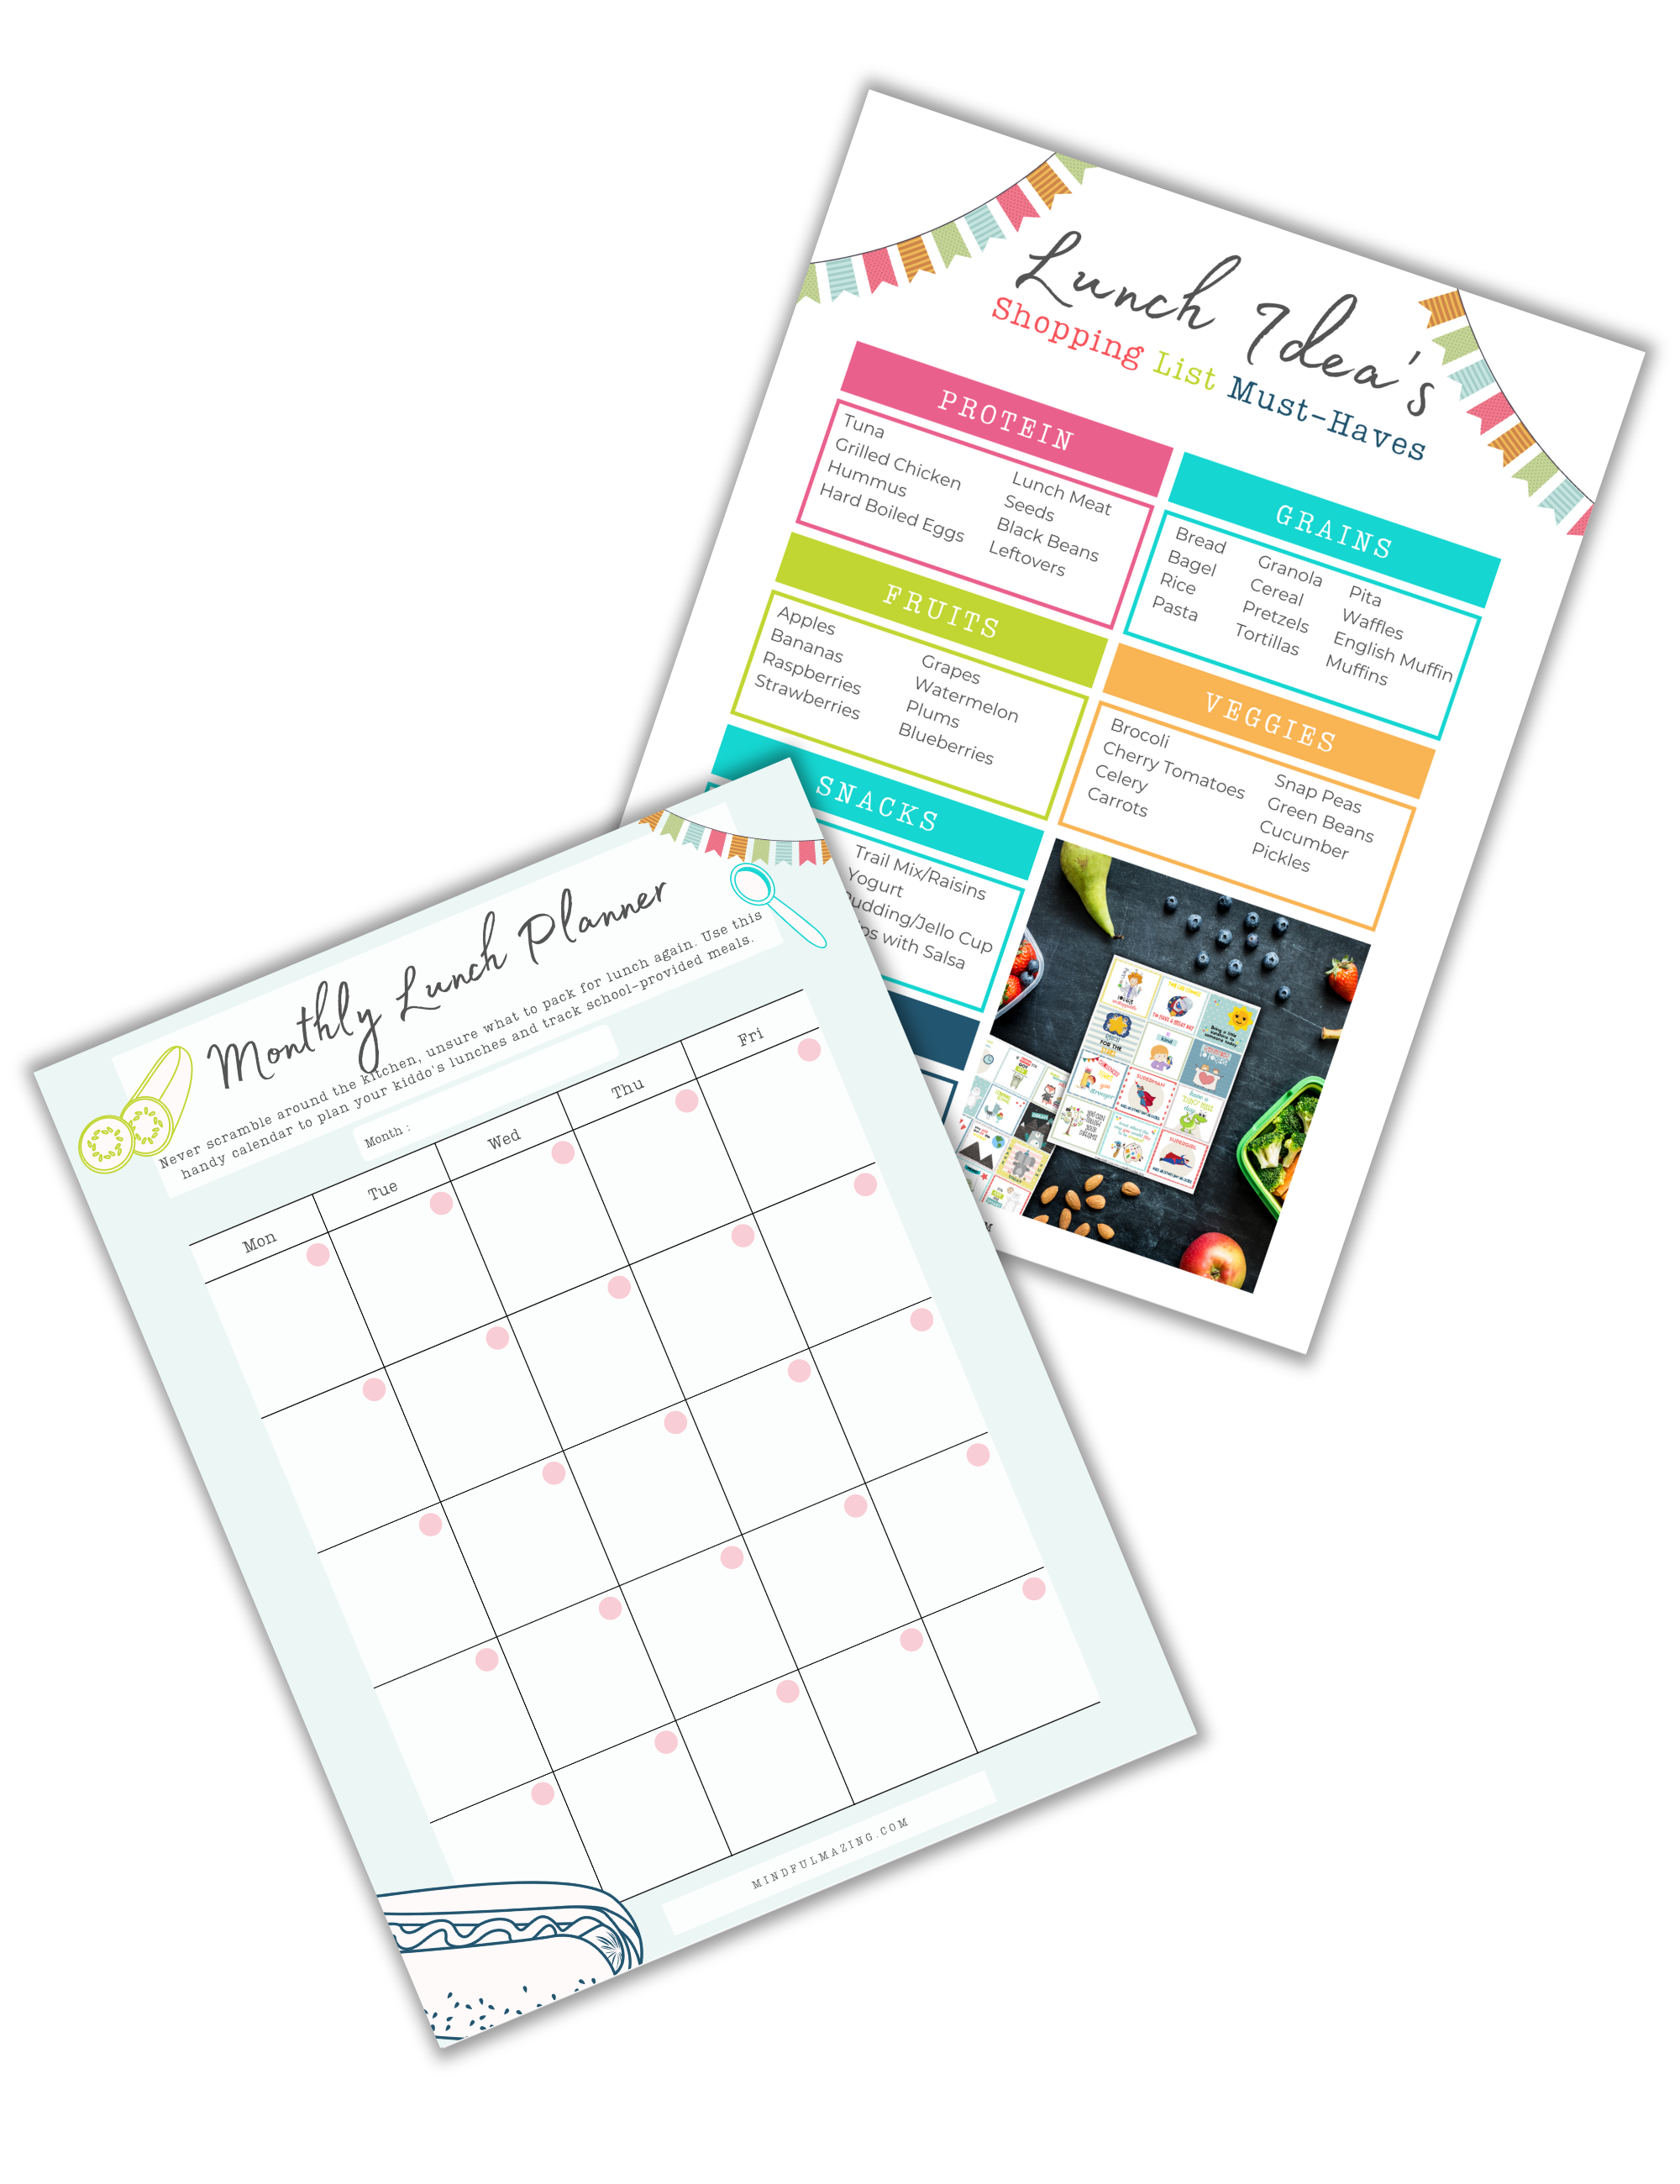 Monthly Lunch Planner (PDF)